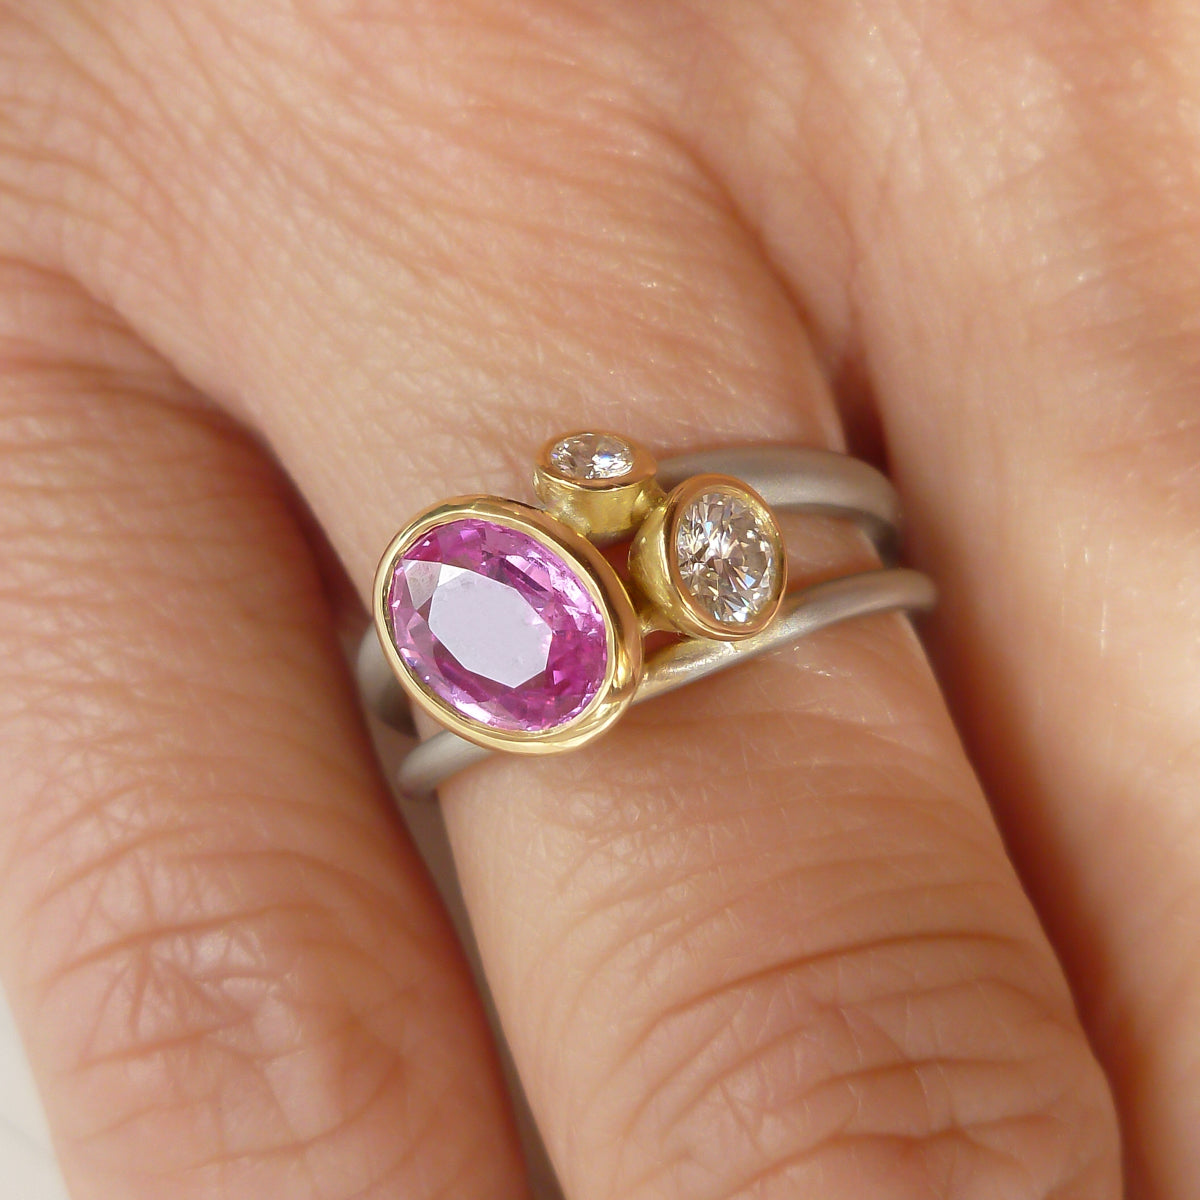 Platinum, 18ct gold, pink sapphire and two white diamonds ring. Contemporary, modern and unique.